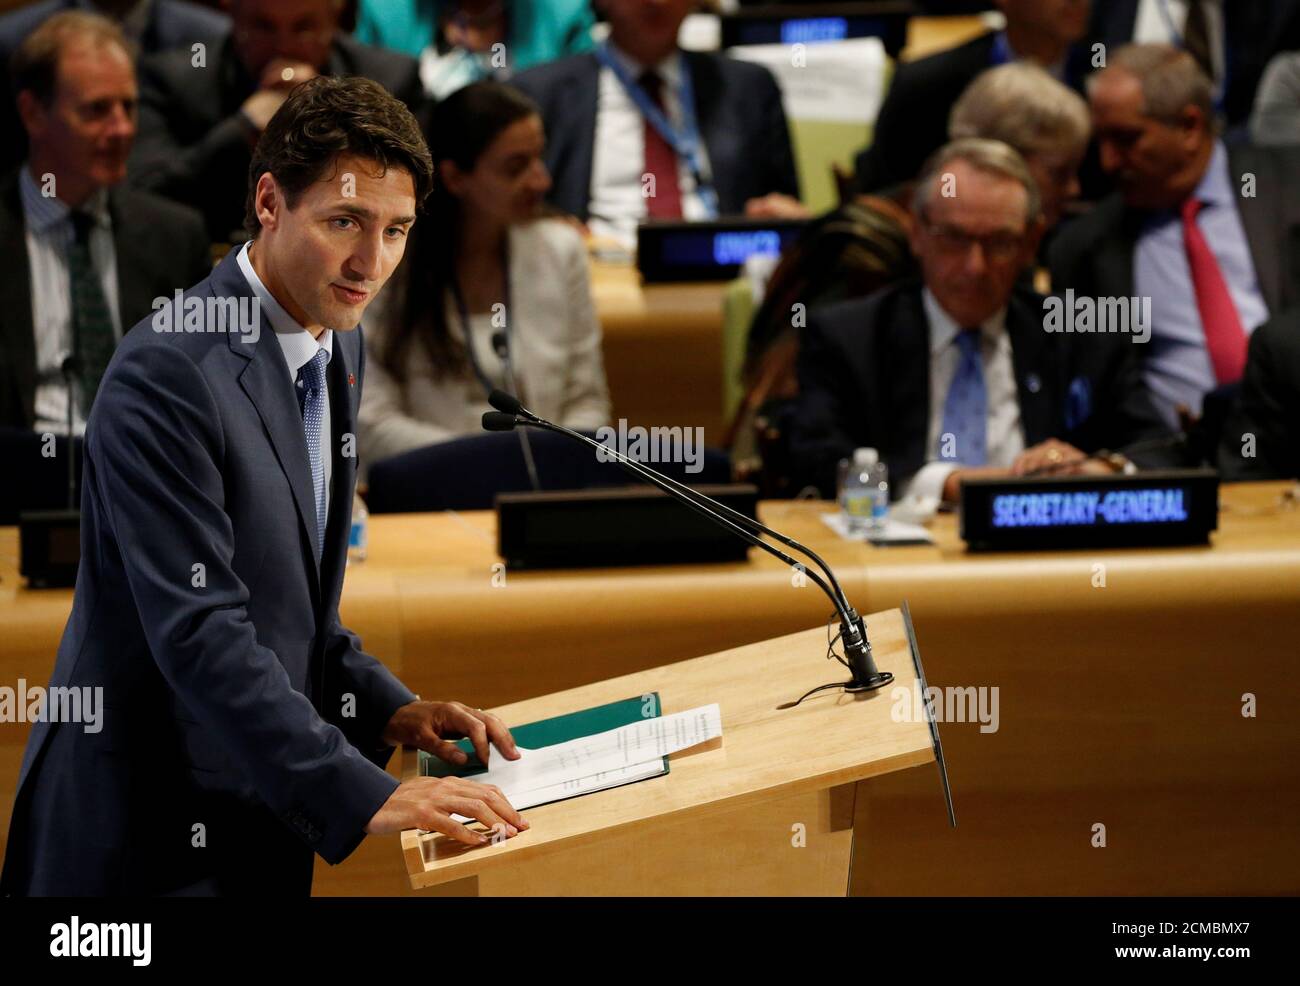 Canadian Prime Minister Justin Trudeau speaks during a High Level Leaders Meeting on Refugees on the sidelines of the United Nations General Assembly at United Nations headquarters in New York City, U.S. September 20, 2016.  REUTERS/Brendan McDermid Stock Photo